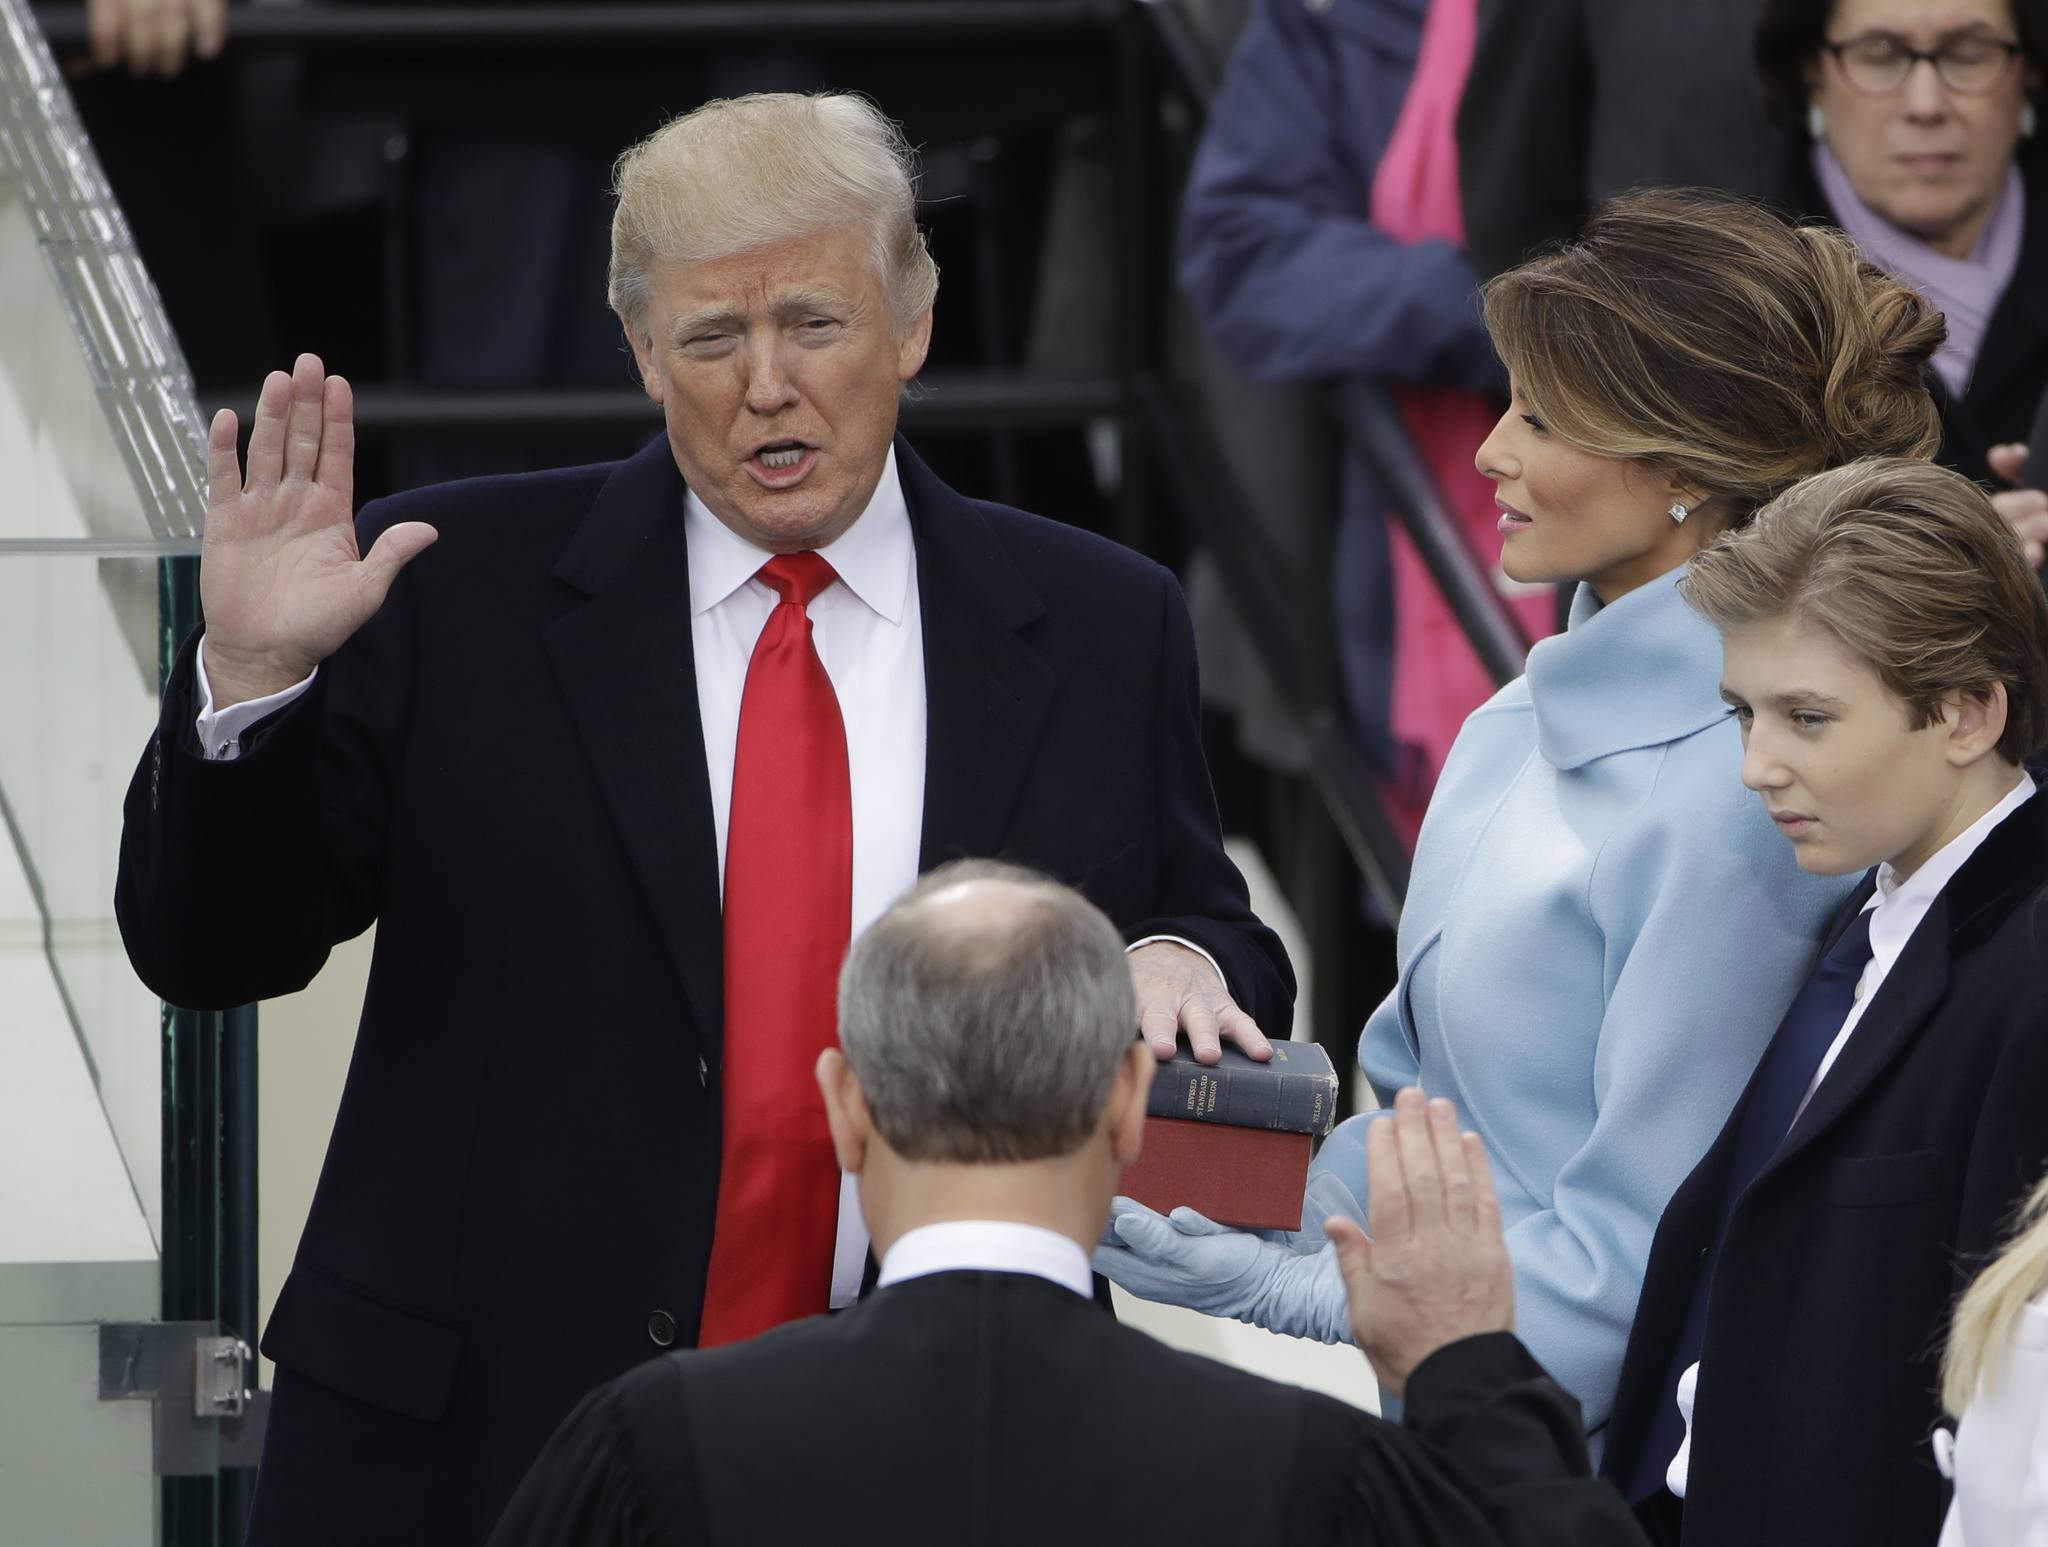 Donald Trump is sworn in as the 45th president of the United States by Chief Justice John Roberts as Melania Trump looks on during the 58th Presidential Inauguration at the U.S. Capitol in Washington. (The Associated Press)